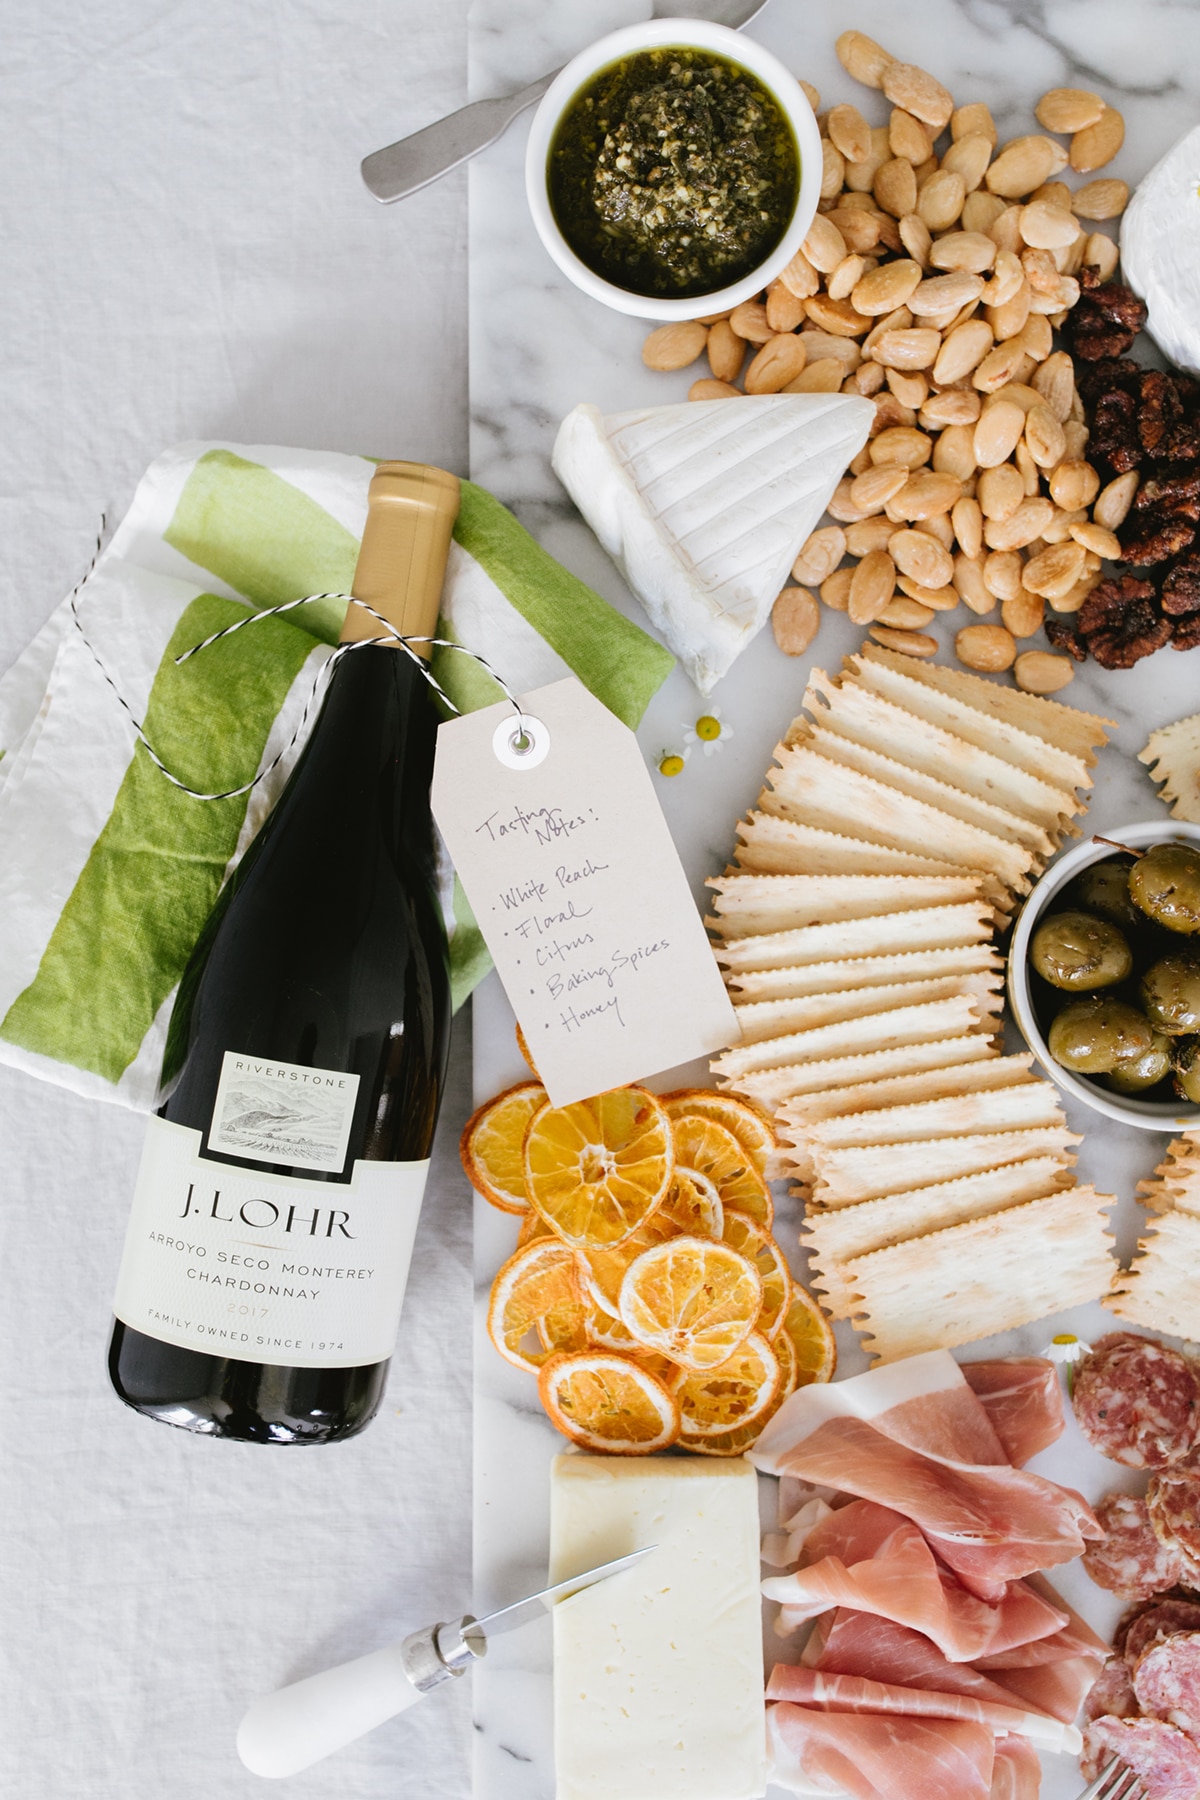 Our Wine & Cheese Board Pairing Guide for White & Red with J. Lohr Chardonnay and Cabernet Sauvignon 